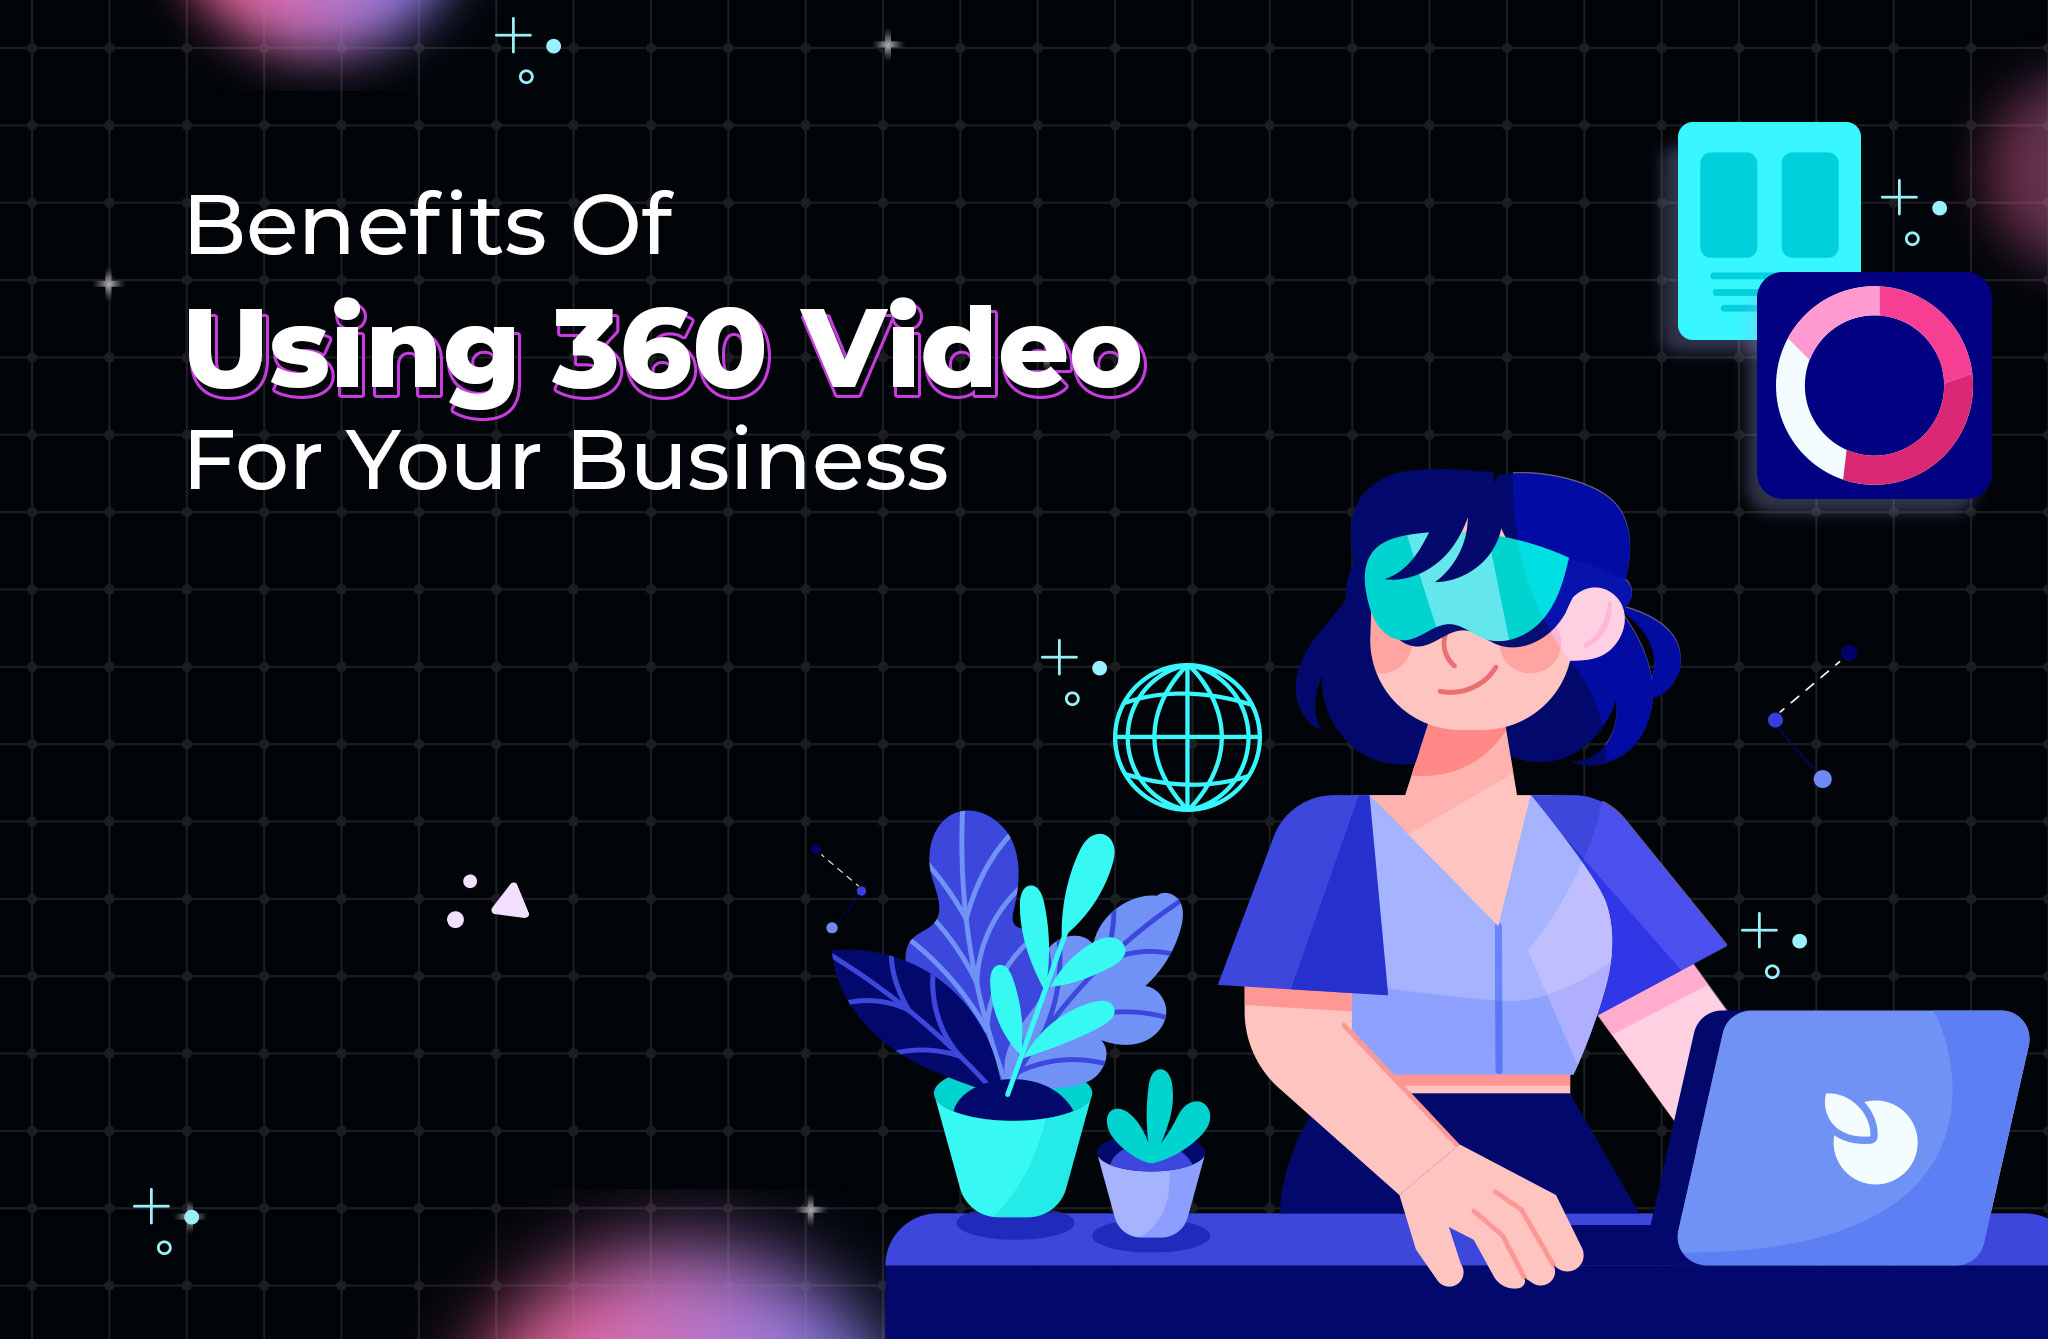 Benefits Of Using 360 Video For Your Business